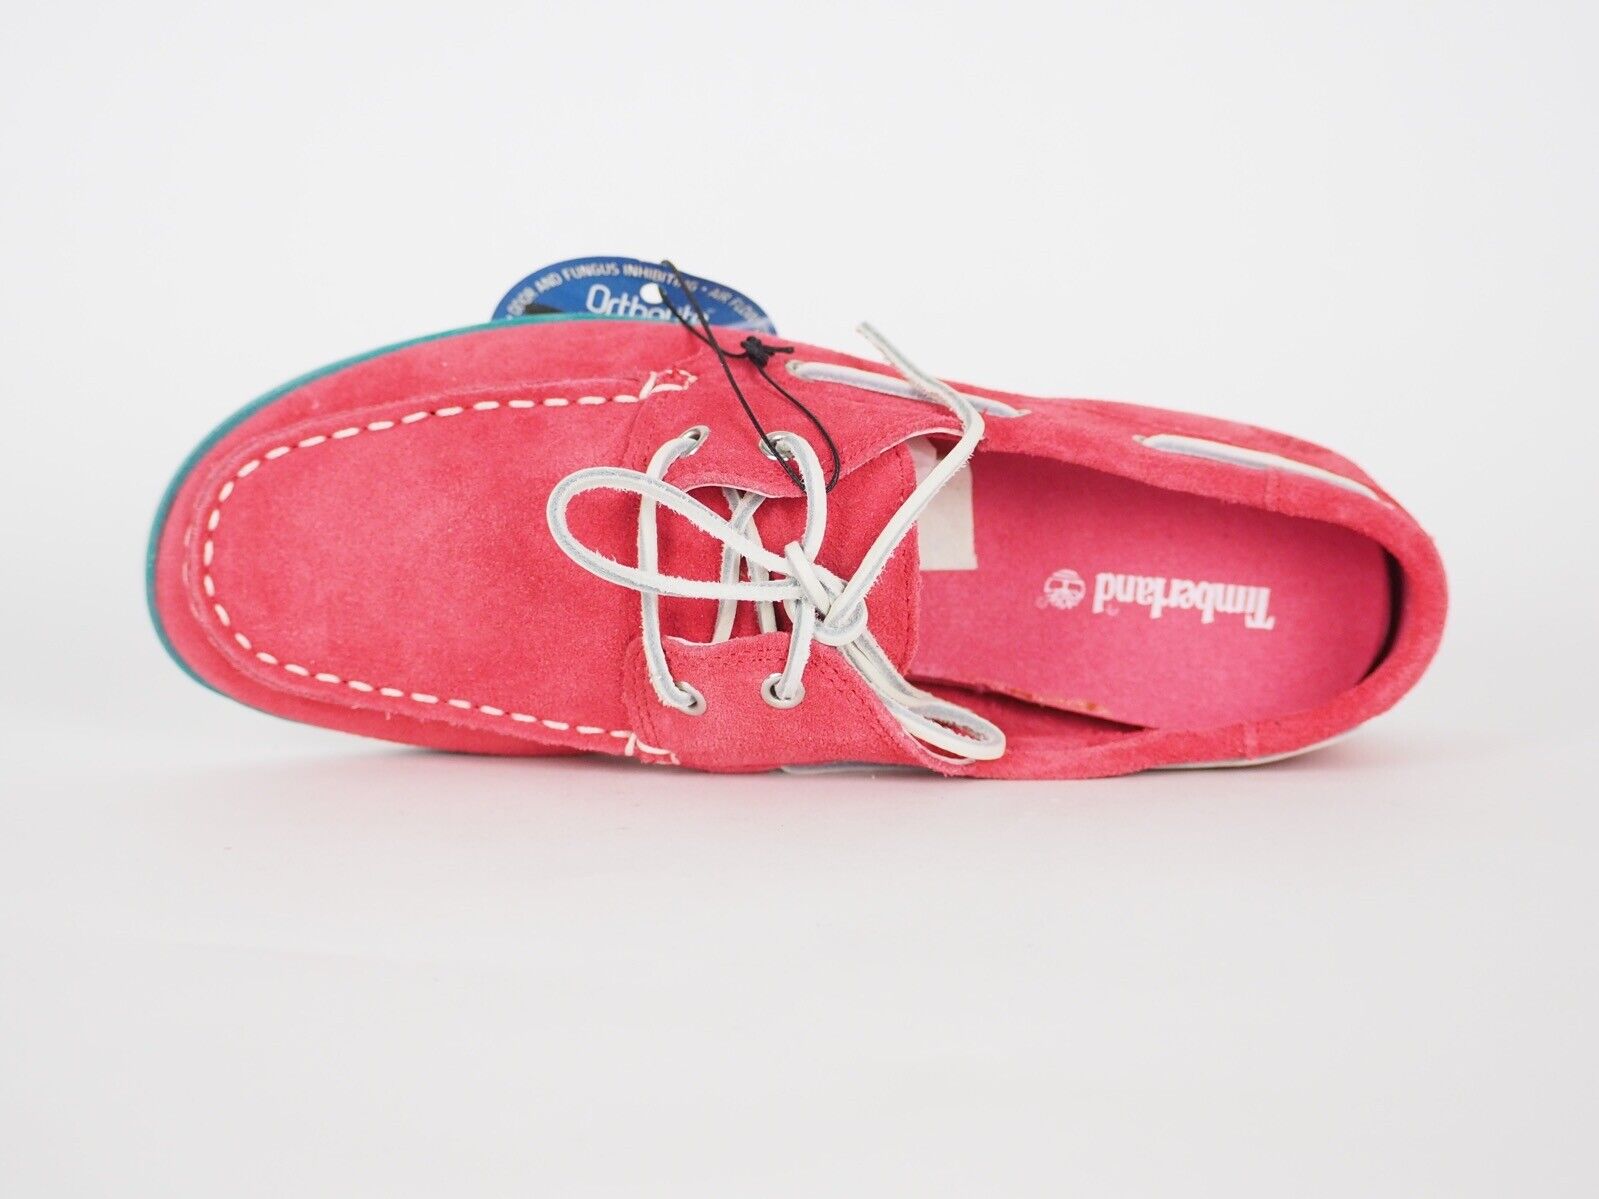 Juniors Boys Timberland Seabury Classic 2 Eye A1L67 Geranium Suede Boat Shoes - London Top Style